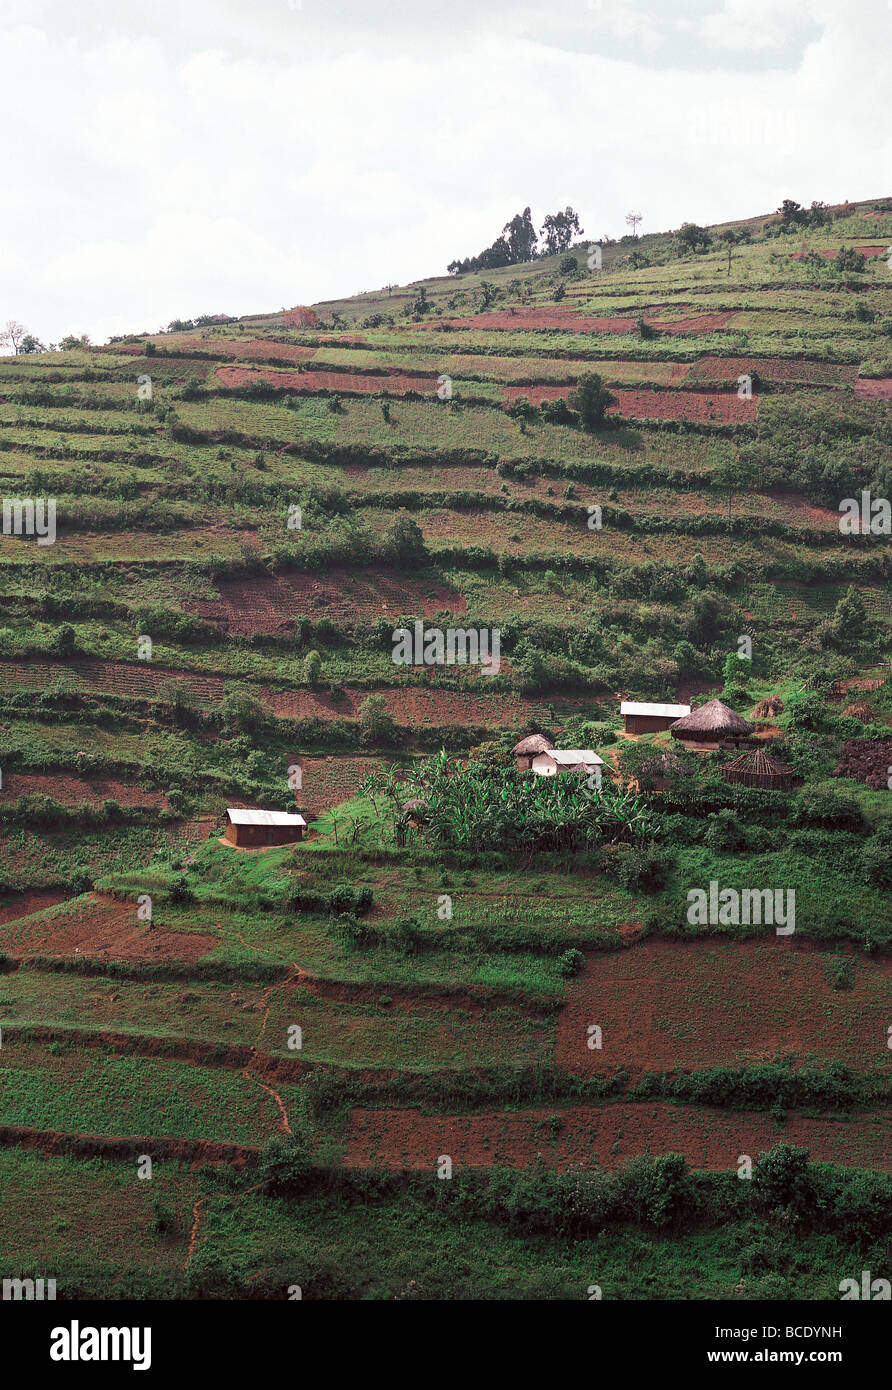 Terracing for small scale farming in hilly country near Kabale south west Uganda East Africa Stock Photo